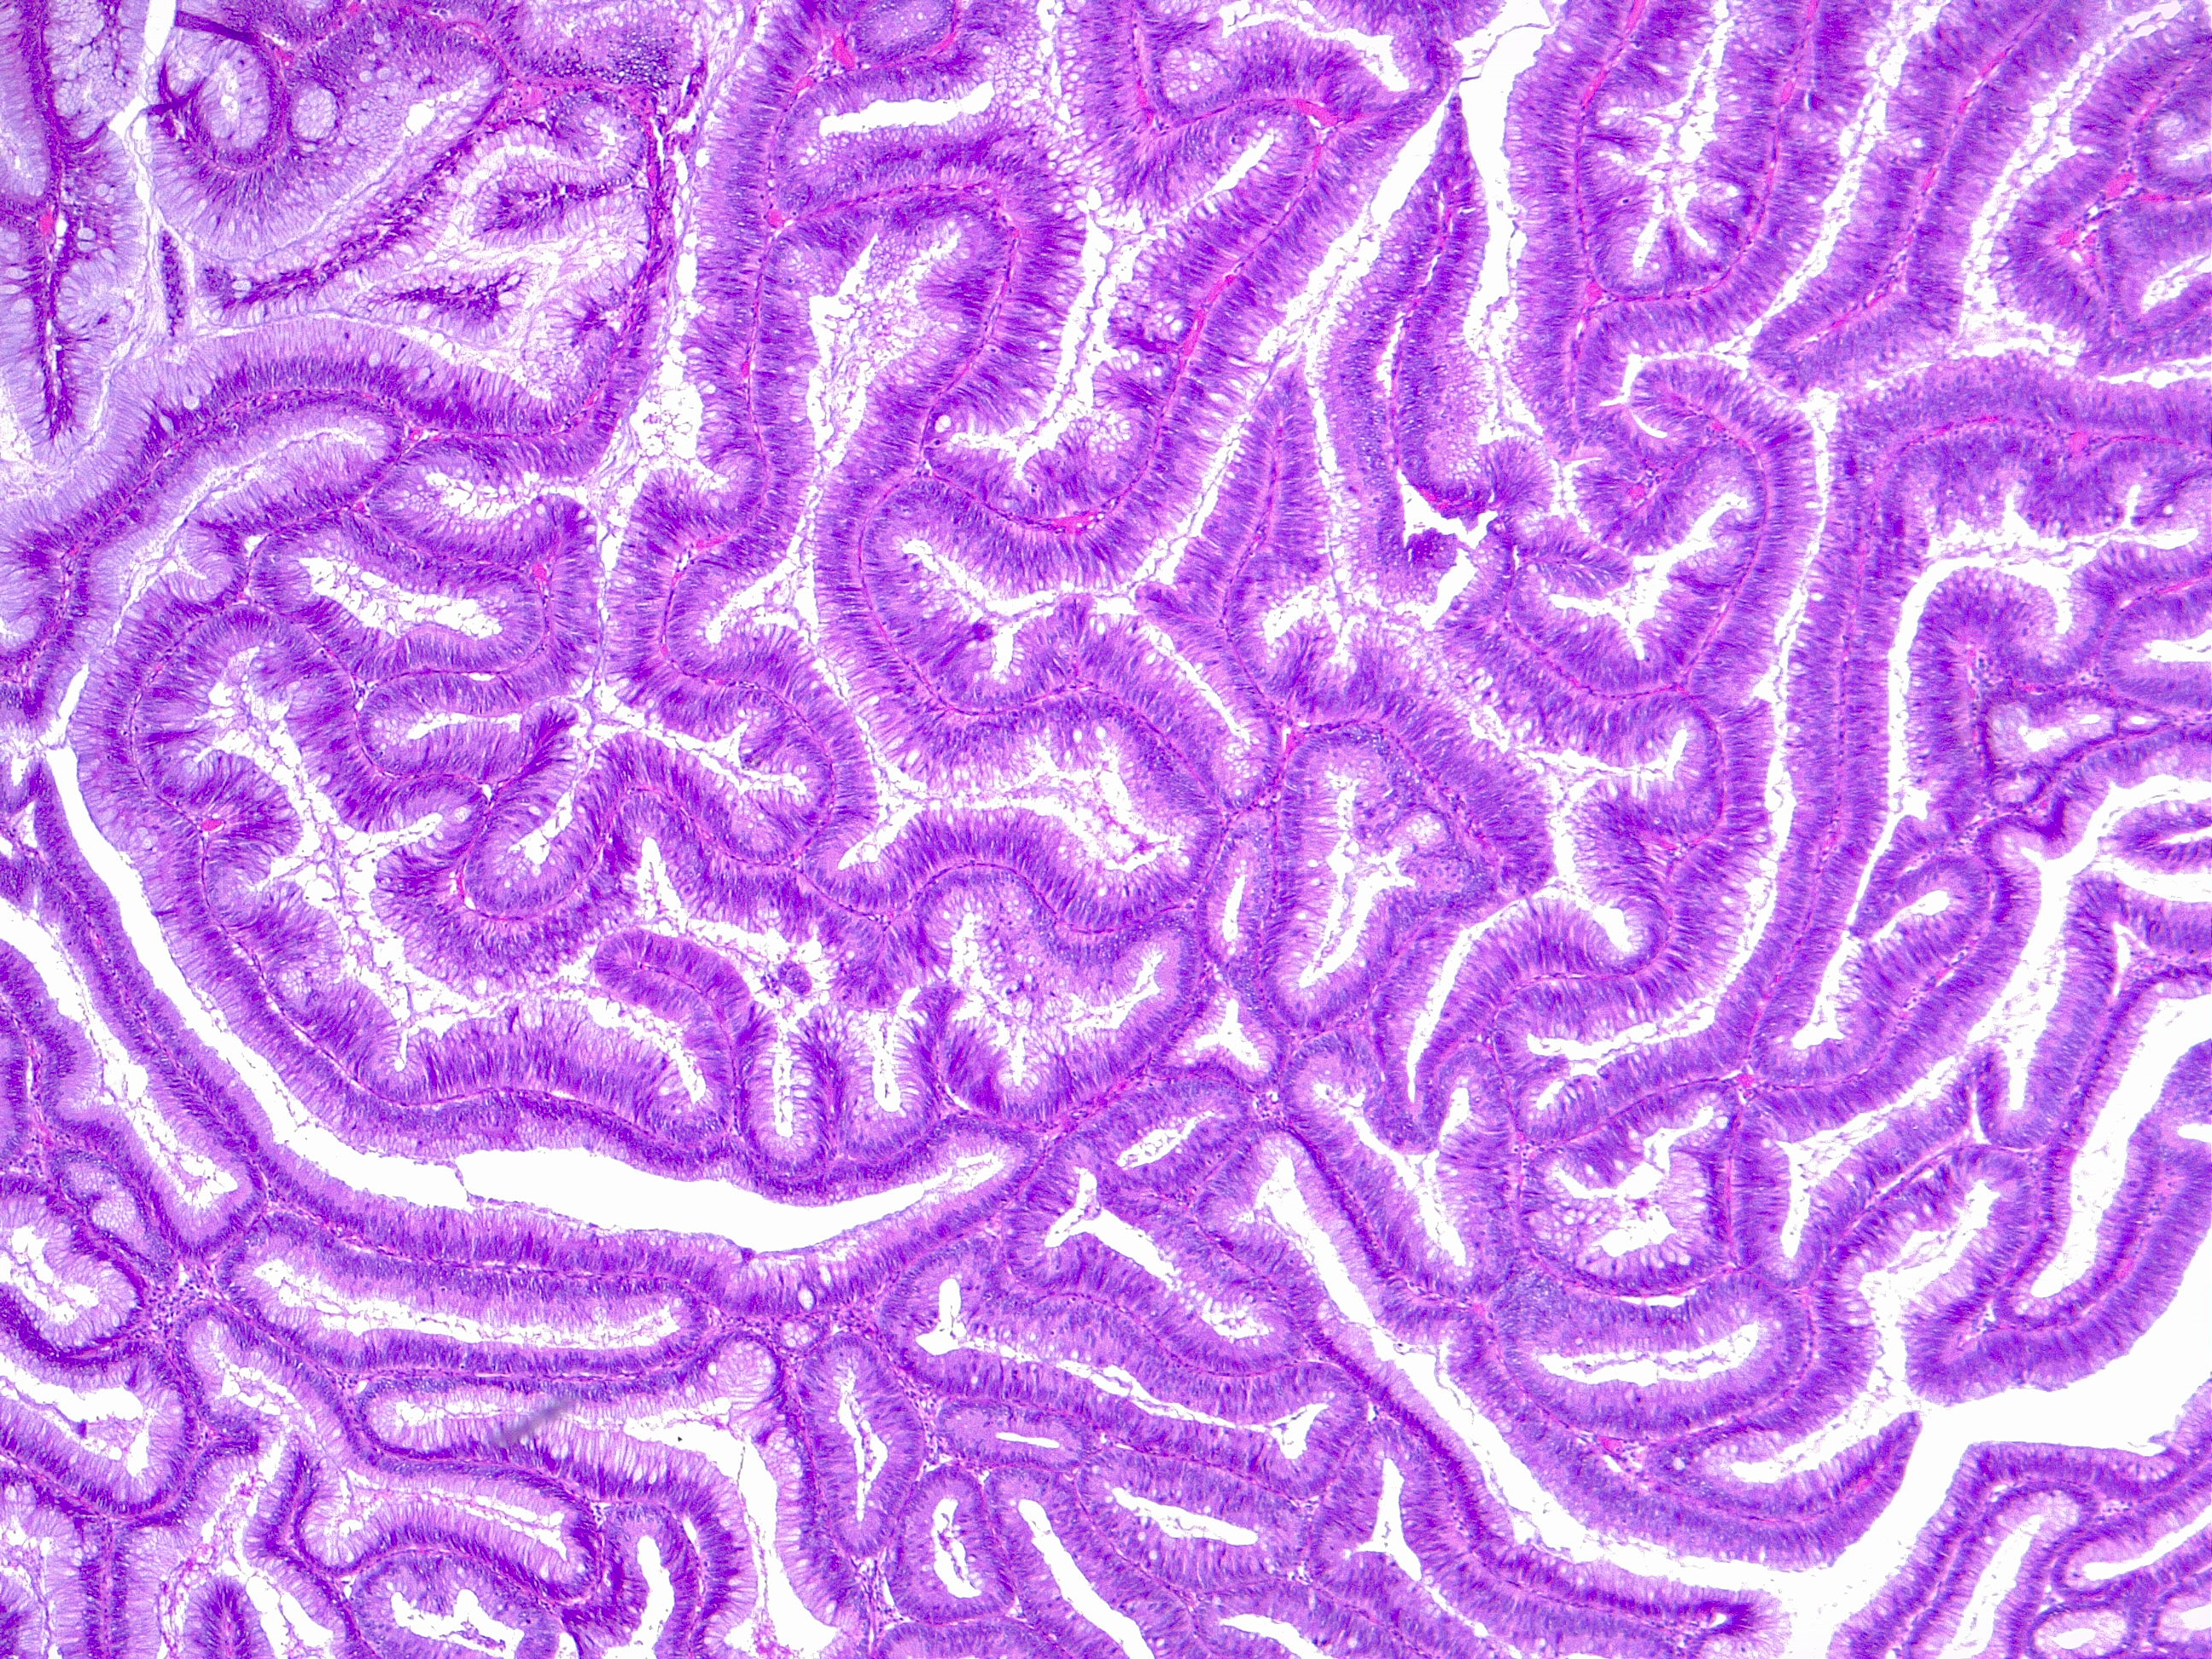 Villous adenoma. Typical complex architecture of mucinous glands, as depicted in this villous colon adenoma.